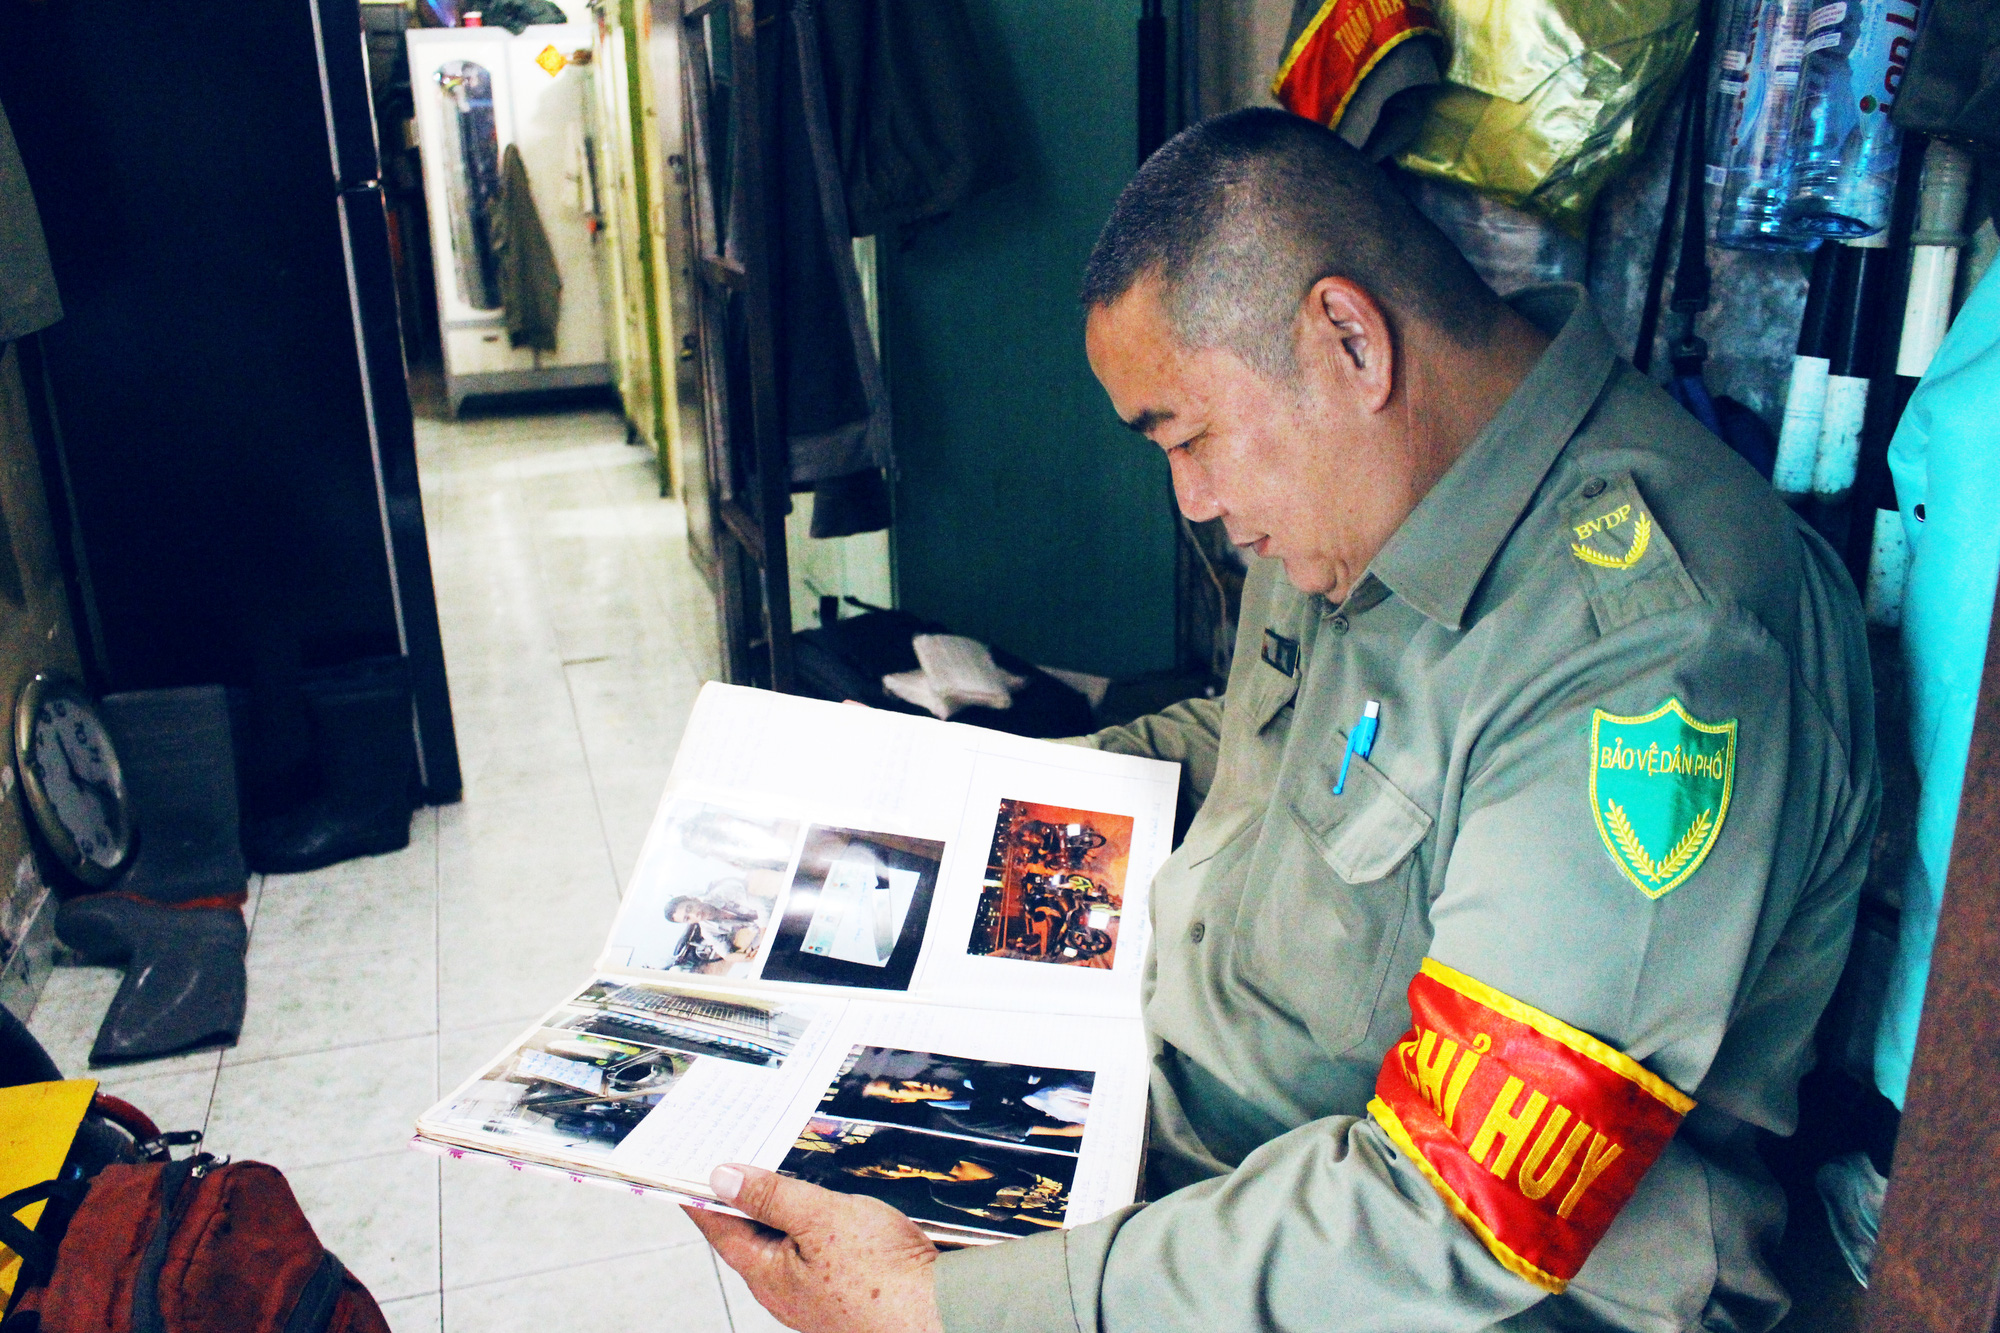 Ly Nhon Thanh looks at a journal where he keeps photos of his past cases of chasing after robbers. Photo: Kim Ut / Tuoi Tre